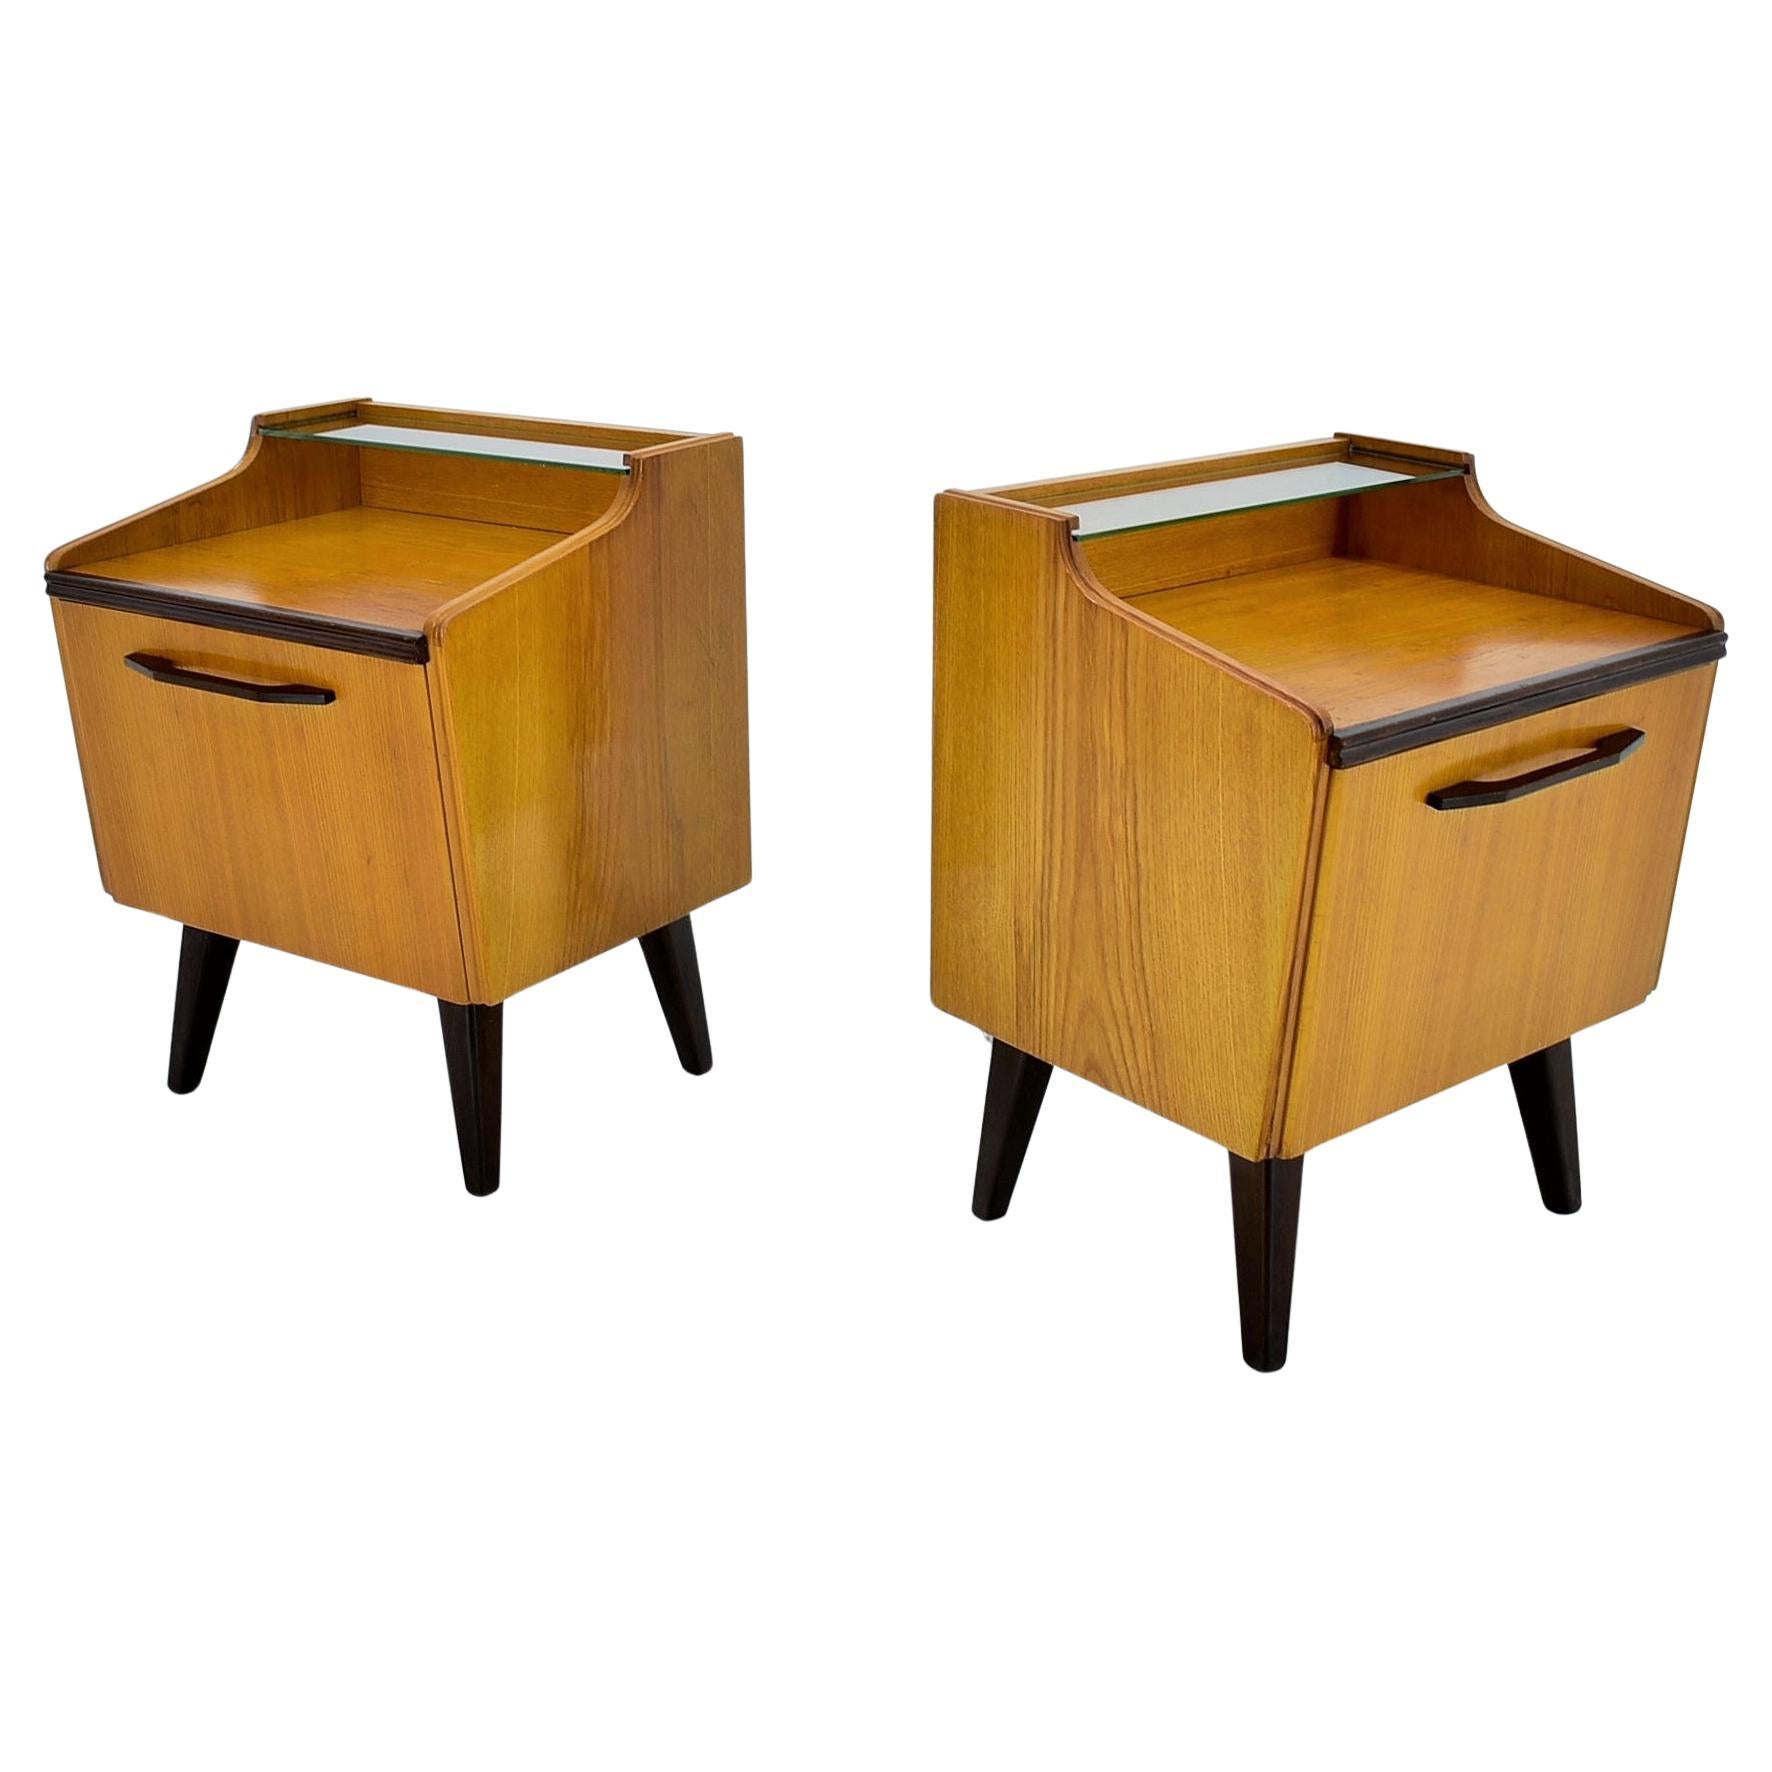 1960s Pair of Midcentury Bedside Tables by Mojmir Požár, Czechoslovakia For Sale